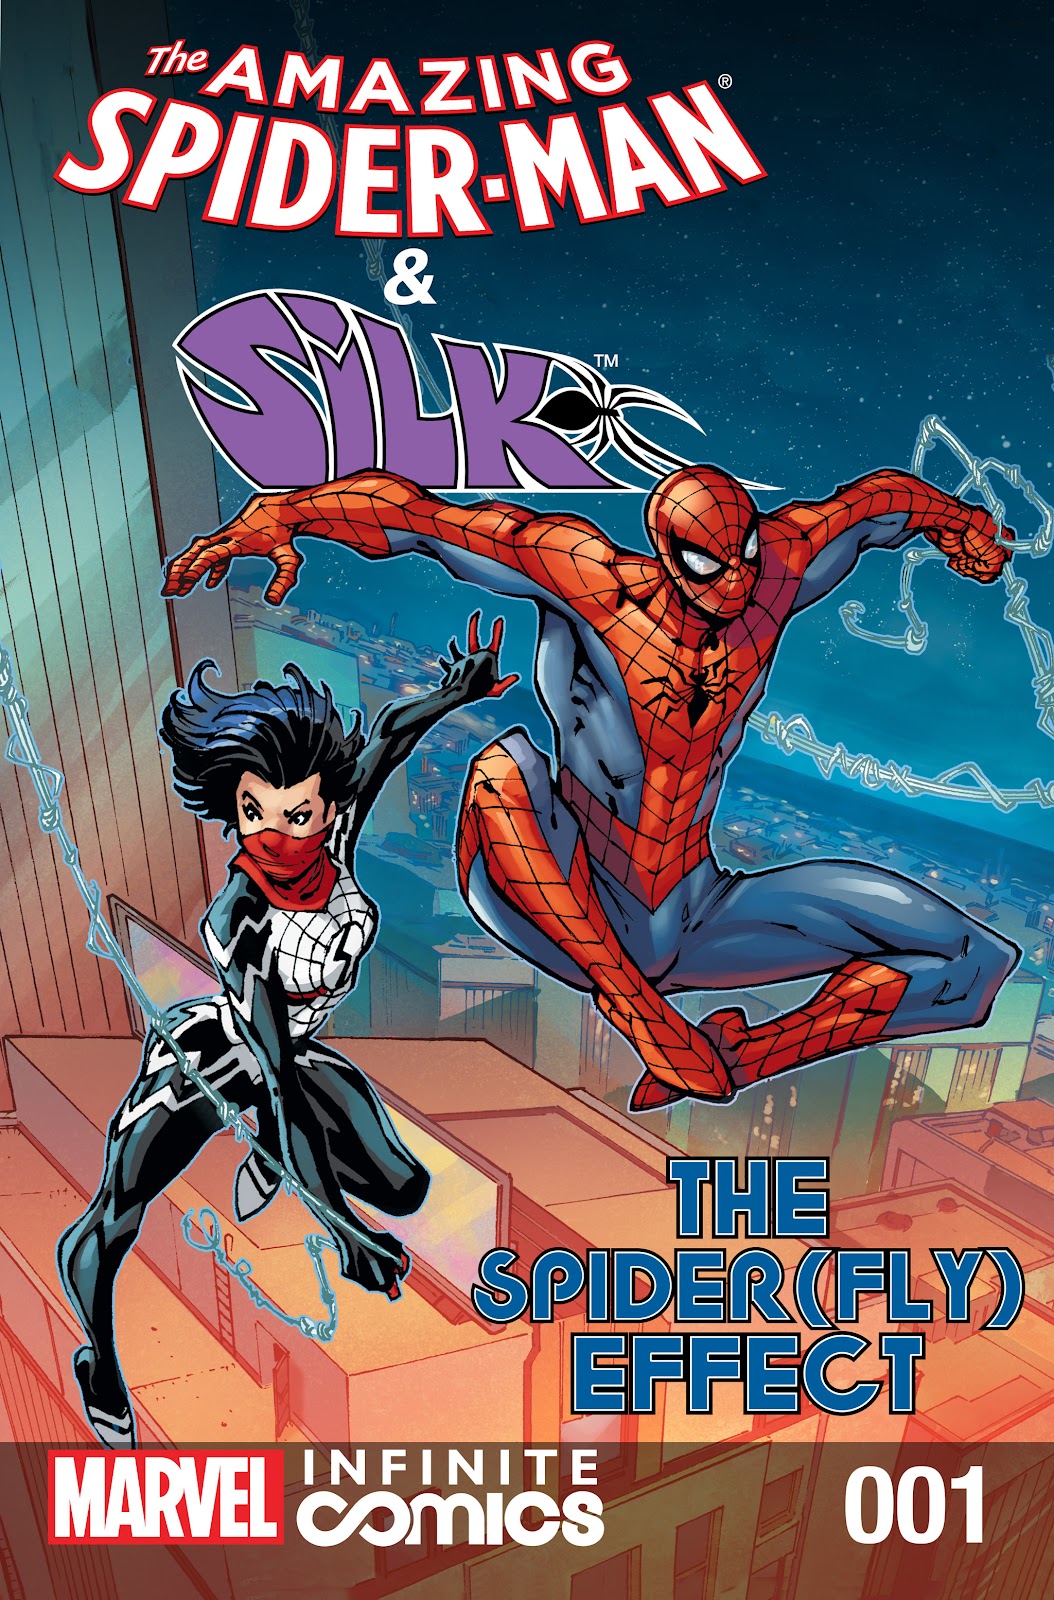 The Amazing Spider-Man & Silk: The Spider(fly) Effect (Infinite Comics) issue 1 - Page 1